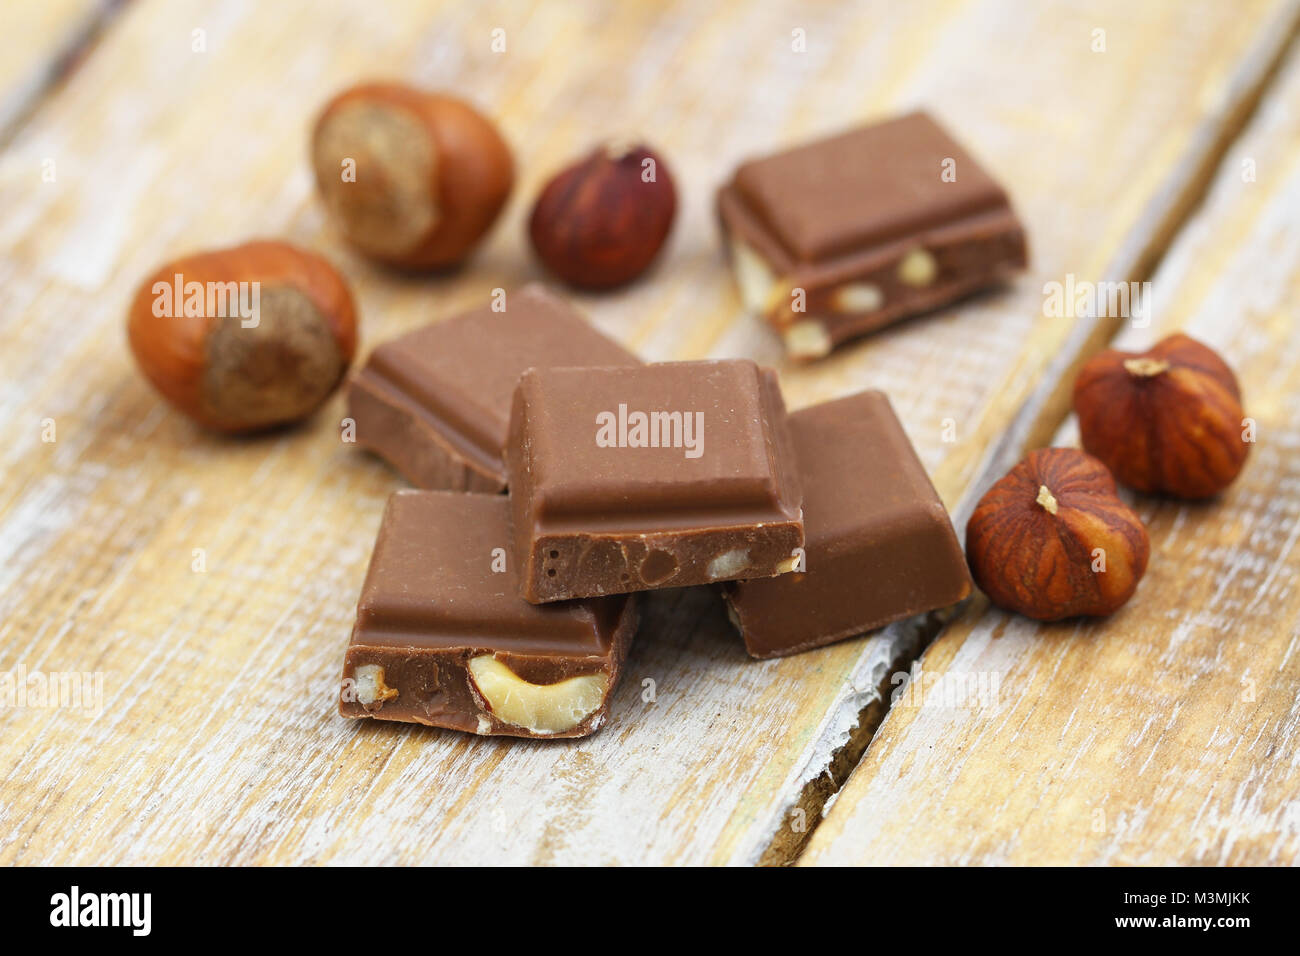 Few pieces of milk chocolates with hazelnuts on rustic wooden surface Stock Photo